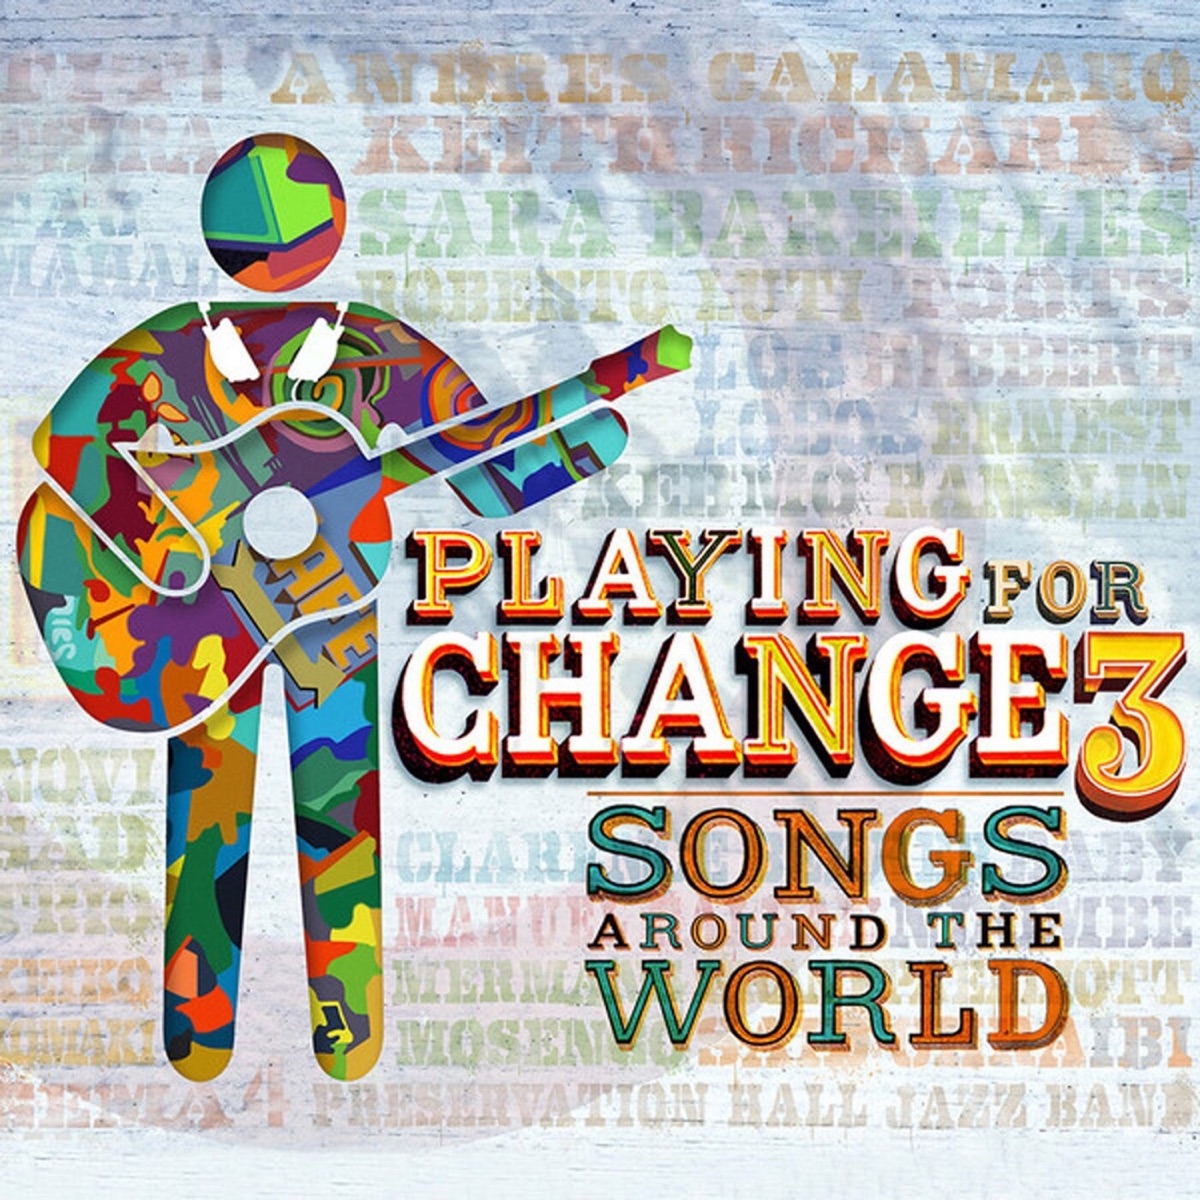 Listen to the Music, Playing For Change